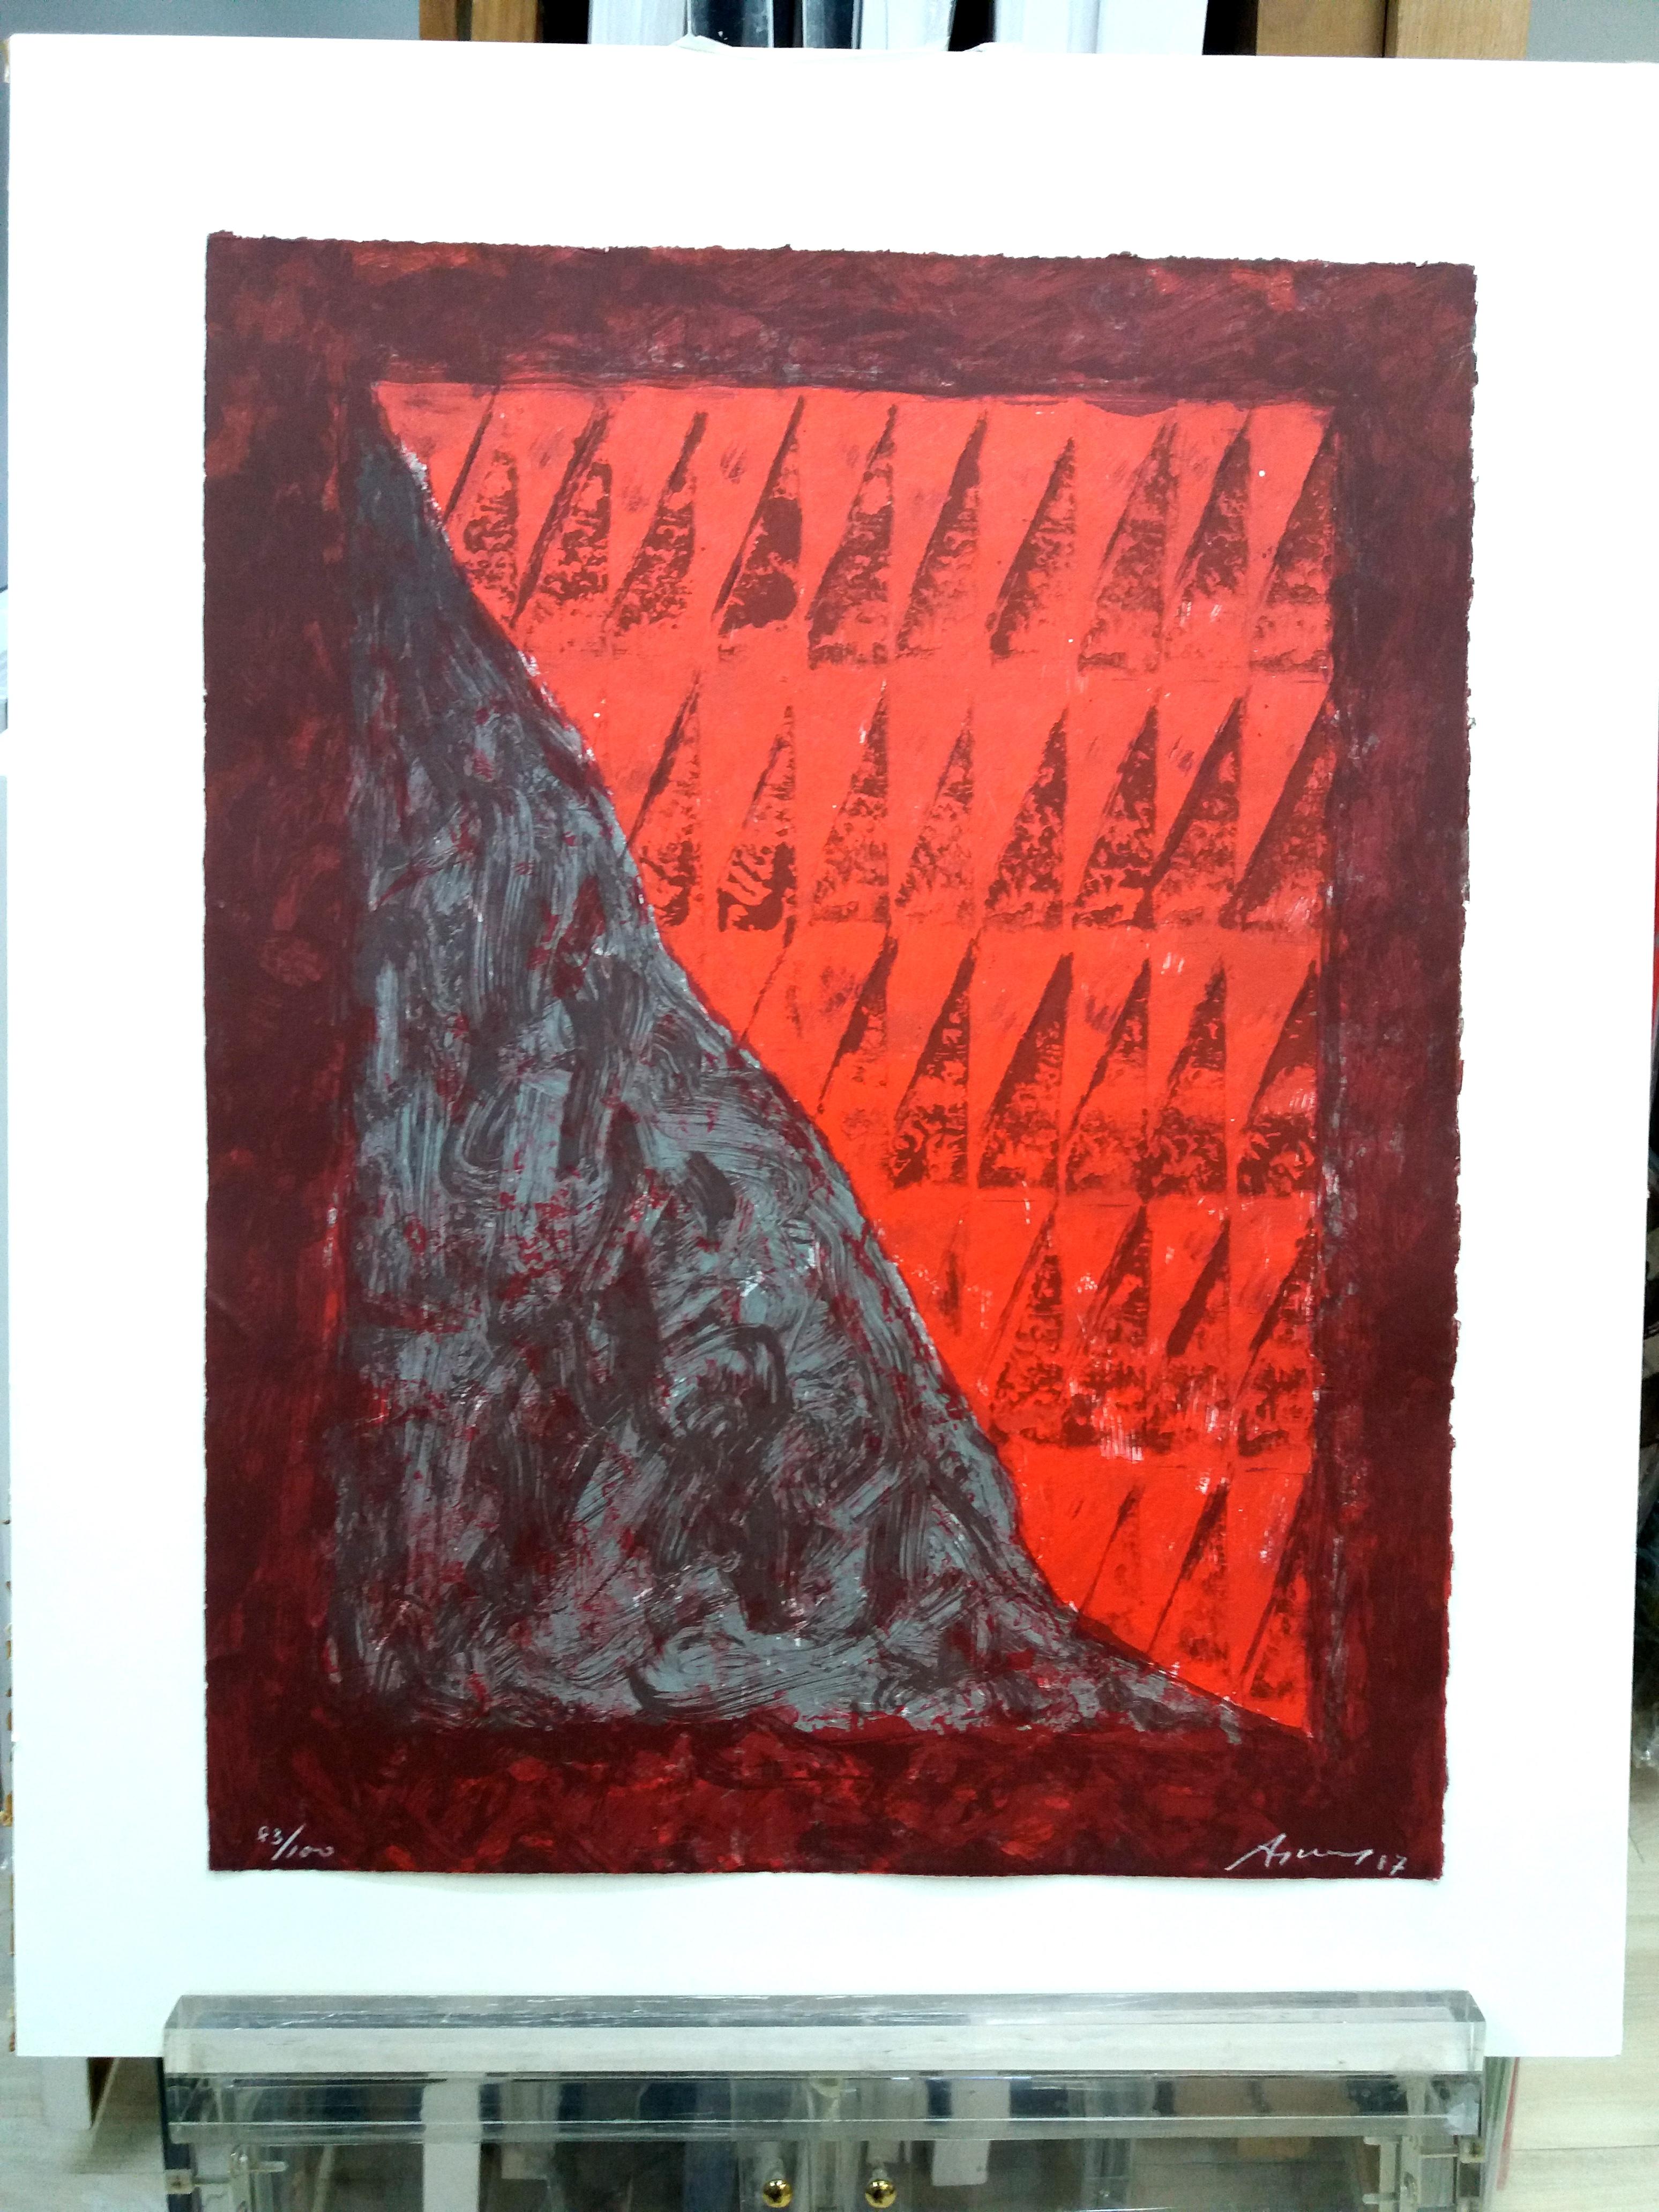 Argimon  Red and Brown, Vertical,  original litograph painting - Abstract Print by Daniel Argimon